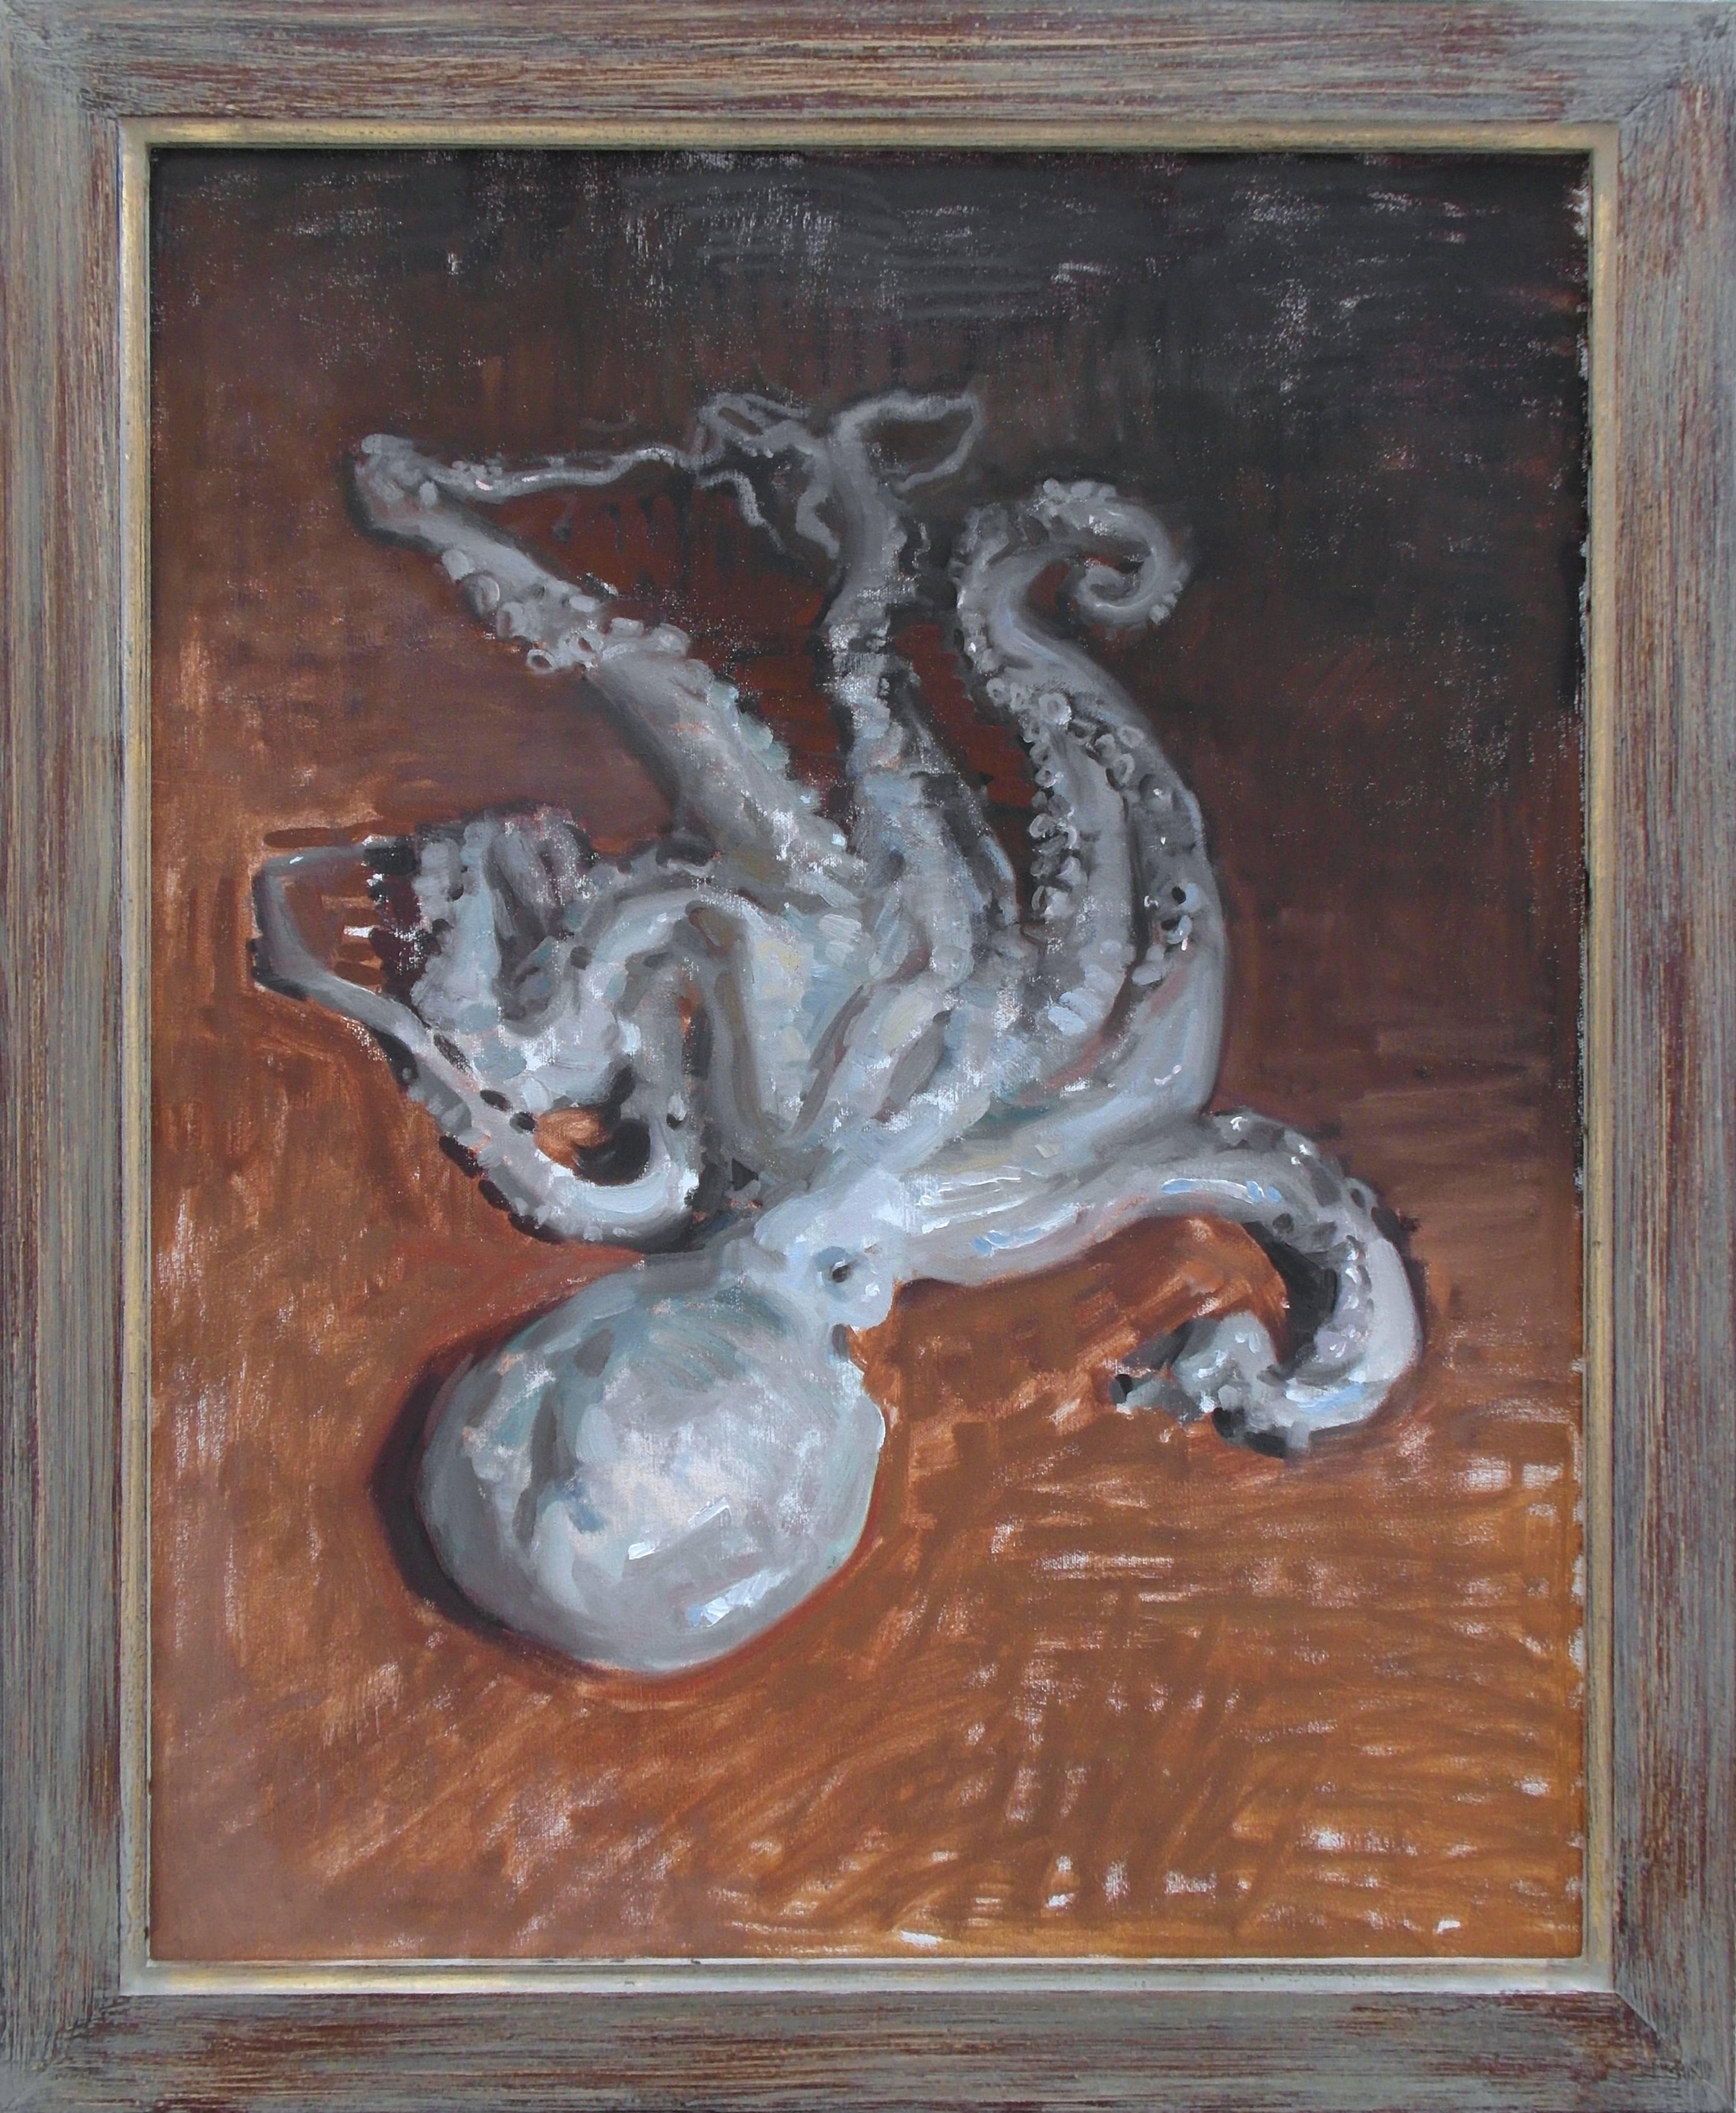 Polpo - Oil painting, octopus, english impressionist realist painter - Painting by Amy Florence